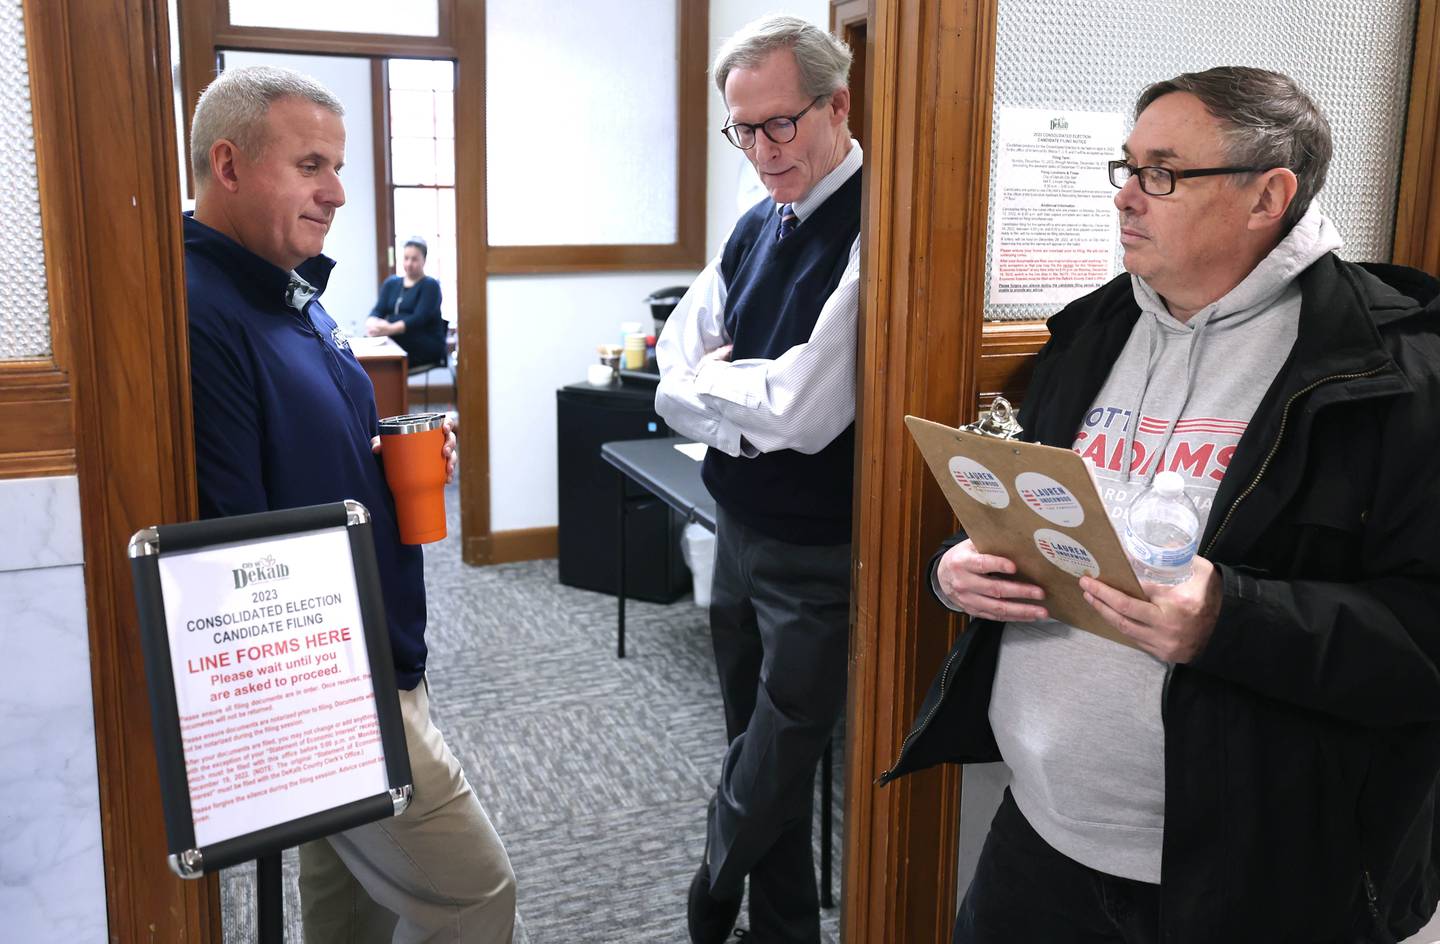 DeKalb City Council Ward 5 alderman Scott McAdams (right) waits for candidate filing to open as mayor Cohen Barnes (left) and city manager Bill Nicklas watch the door Monday, Dec. 12, 2022, at City Hall. McAdams, who is running for re-election, was among the first candidates in line Monday at 8:30 a.m. when filing opened at City Hall.